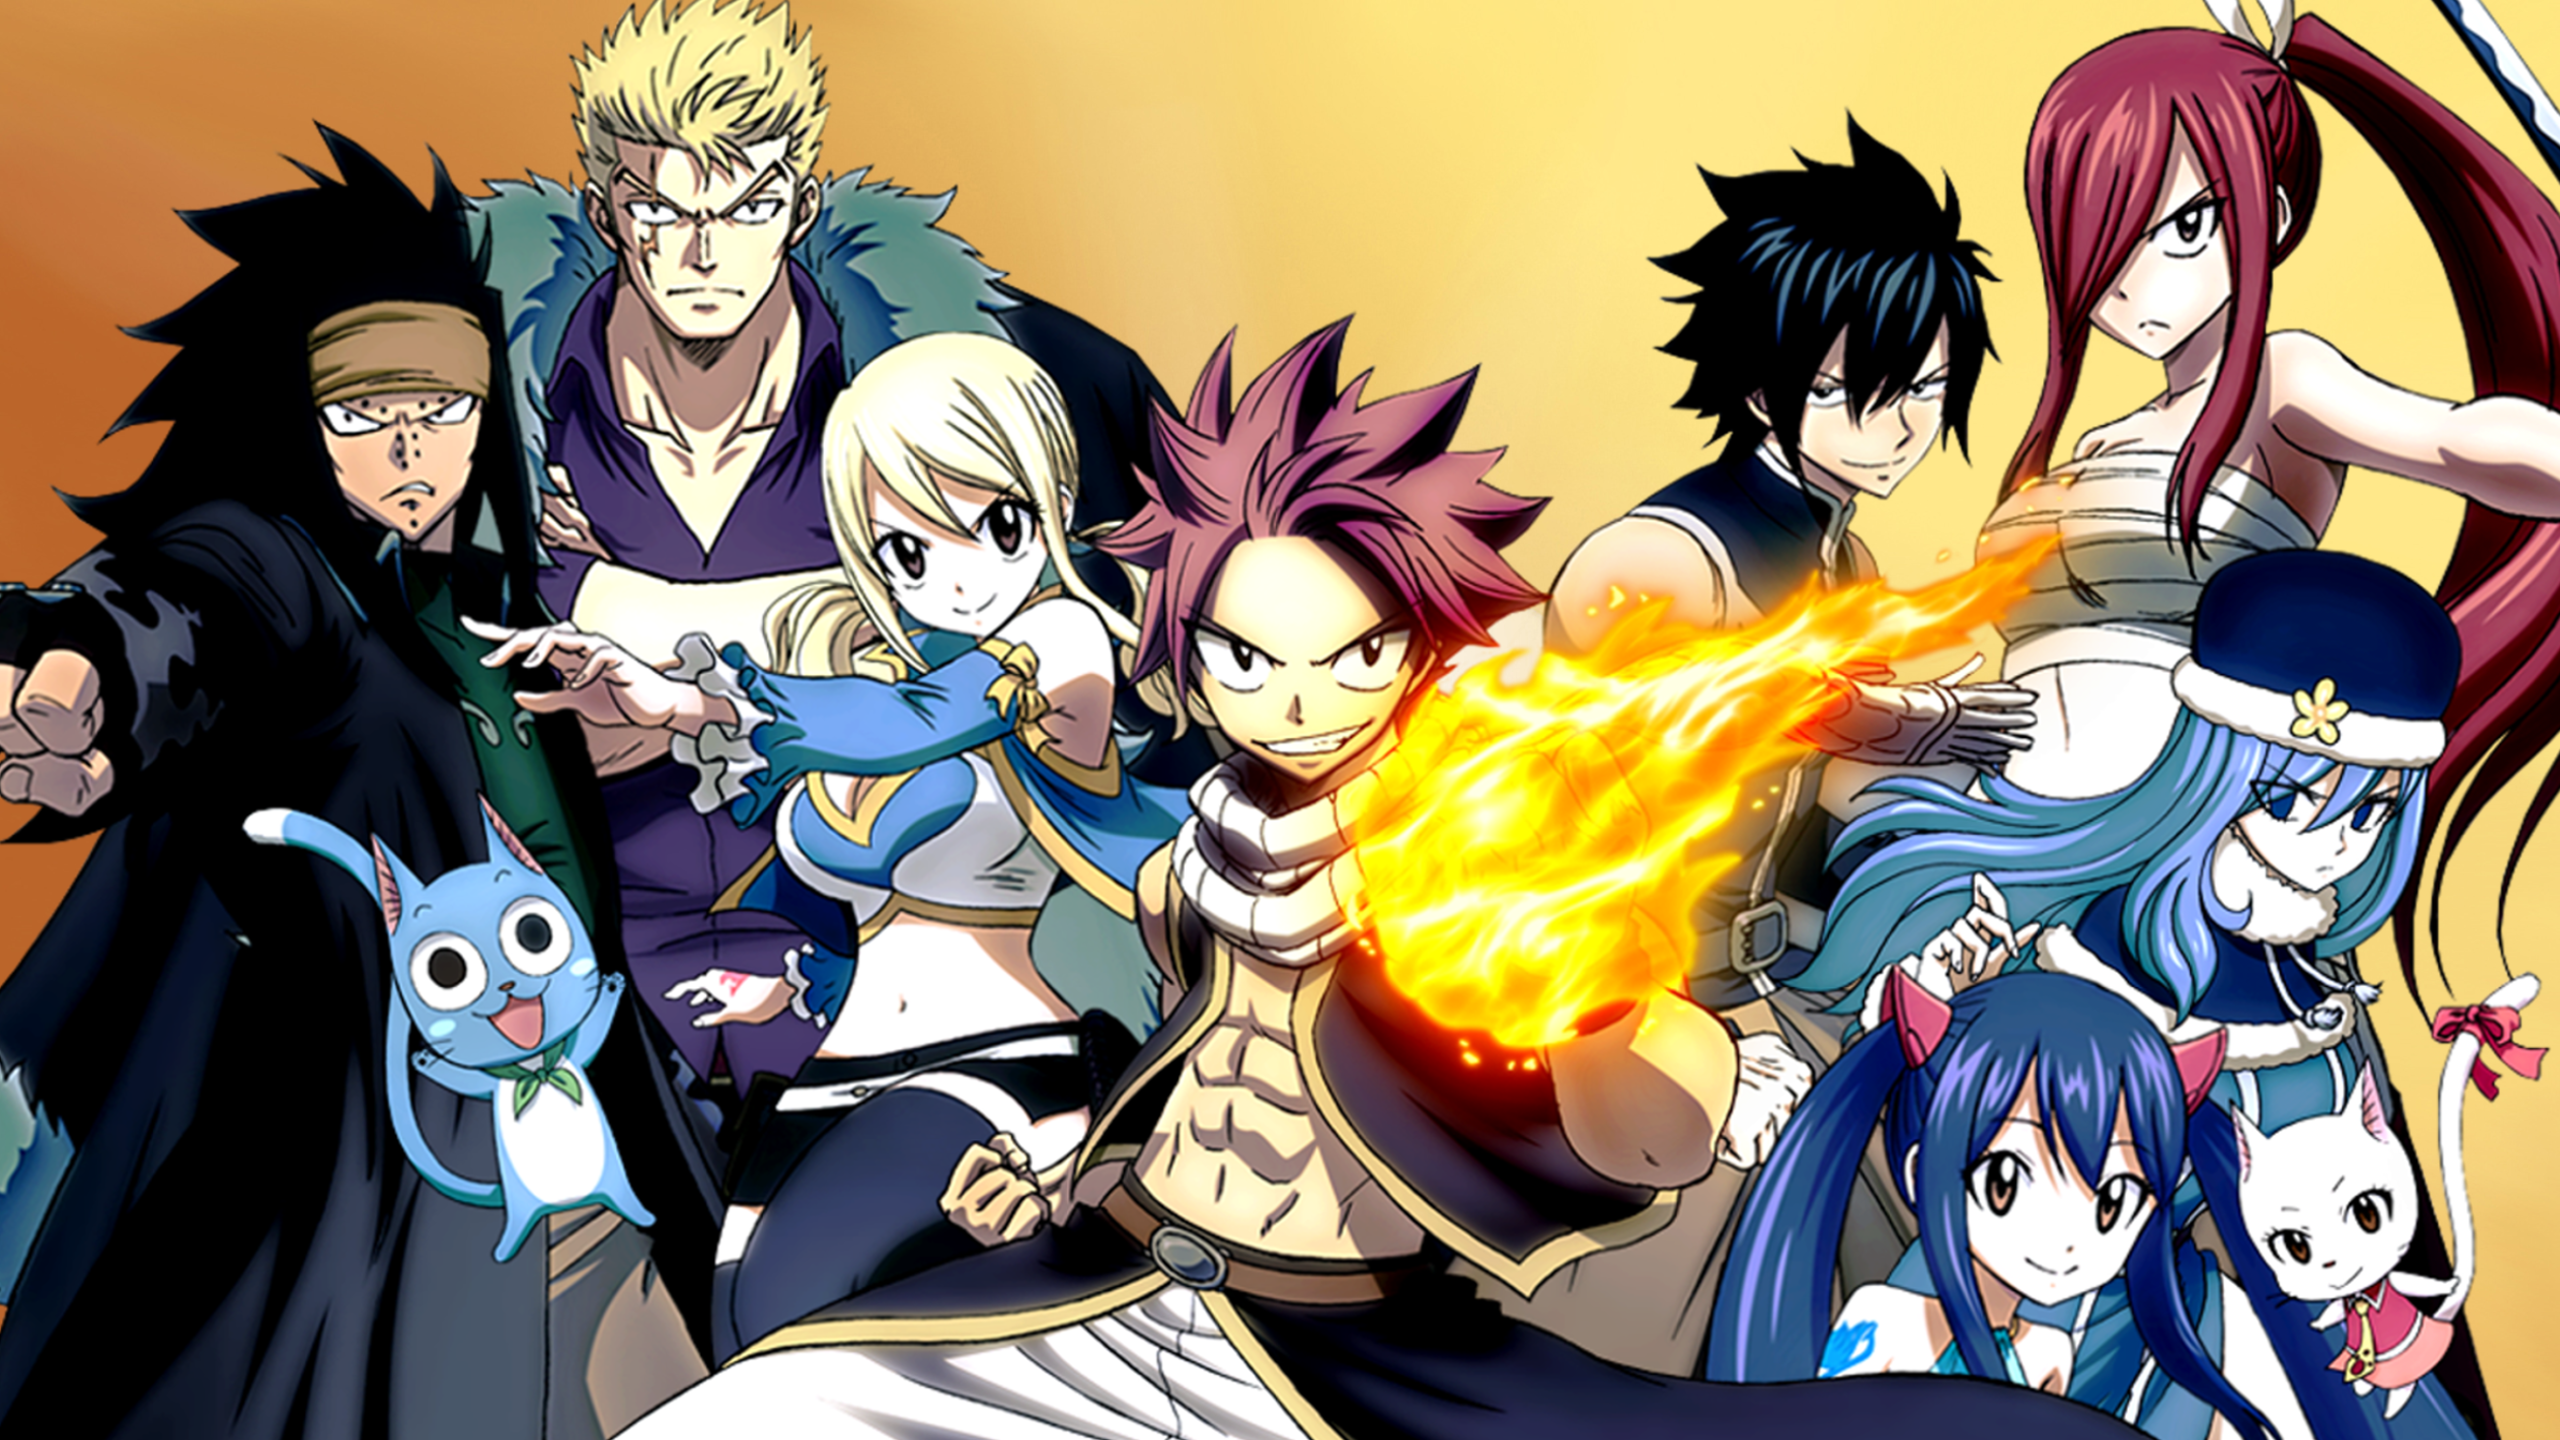 Lucy Heartfilia Natsu Dragneel Wendy Marvell Erza Scarlet Gray Fullbuster Charles Fairy Tail Happy F 2560x1440